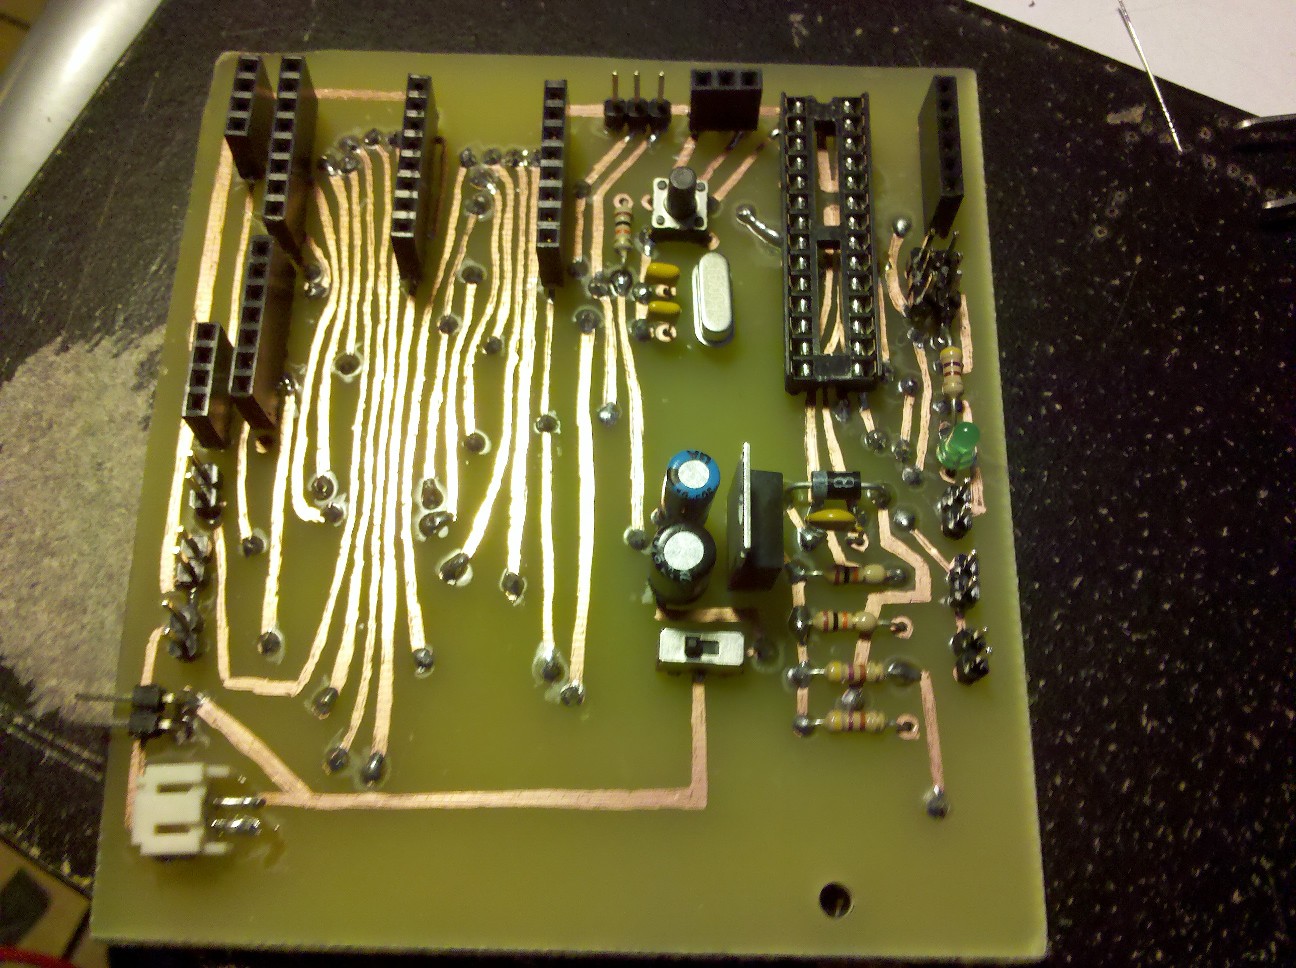 Custom PCB with parts soldered in